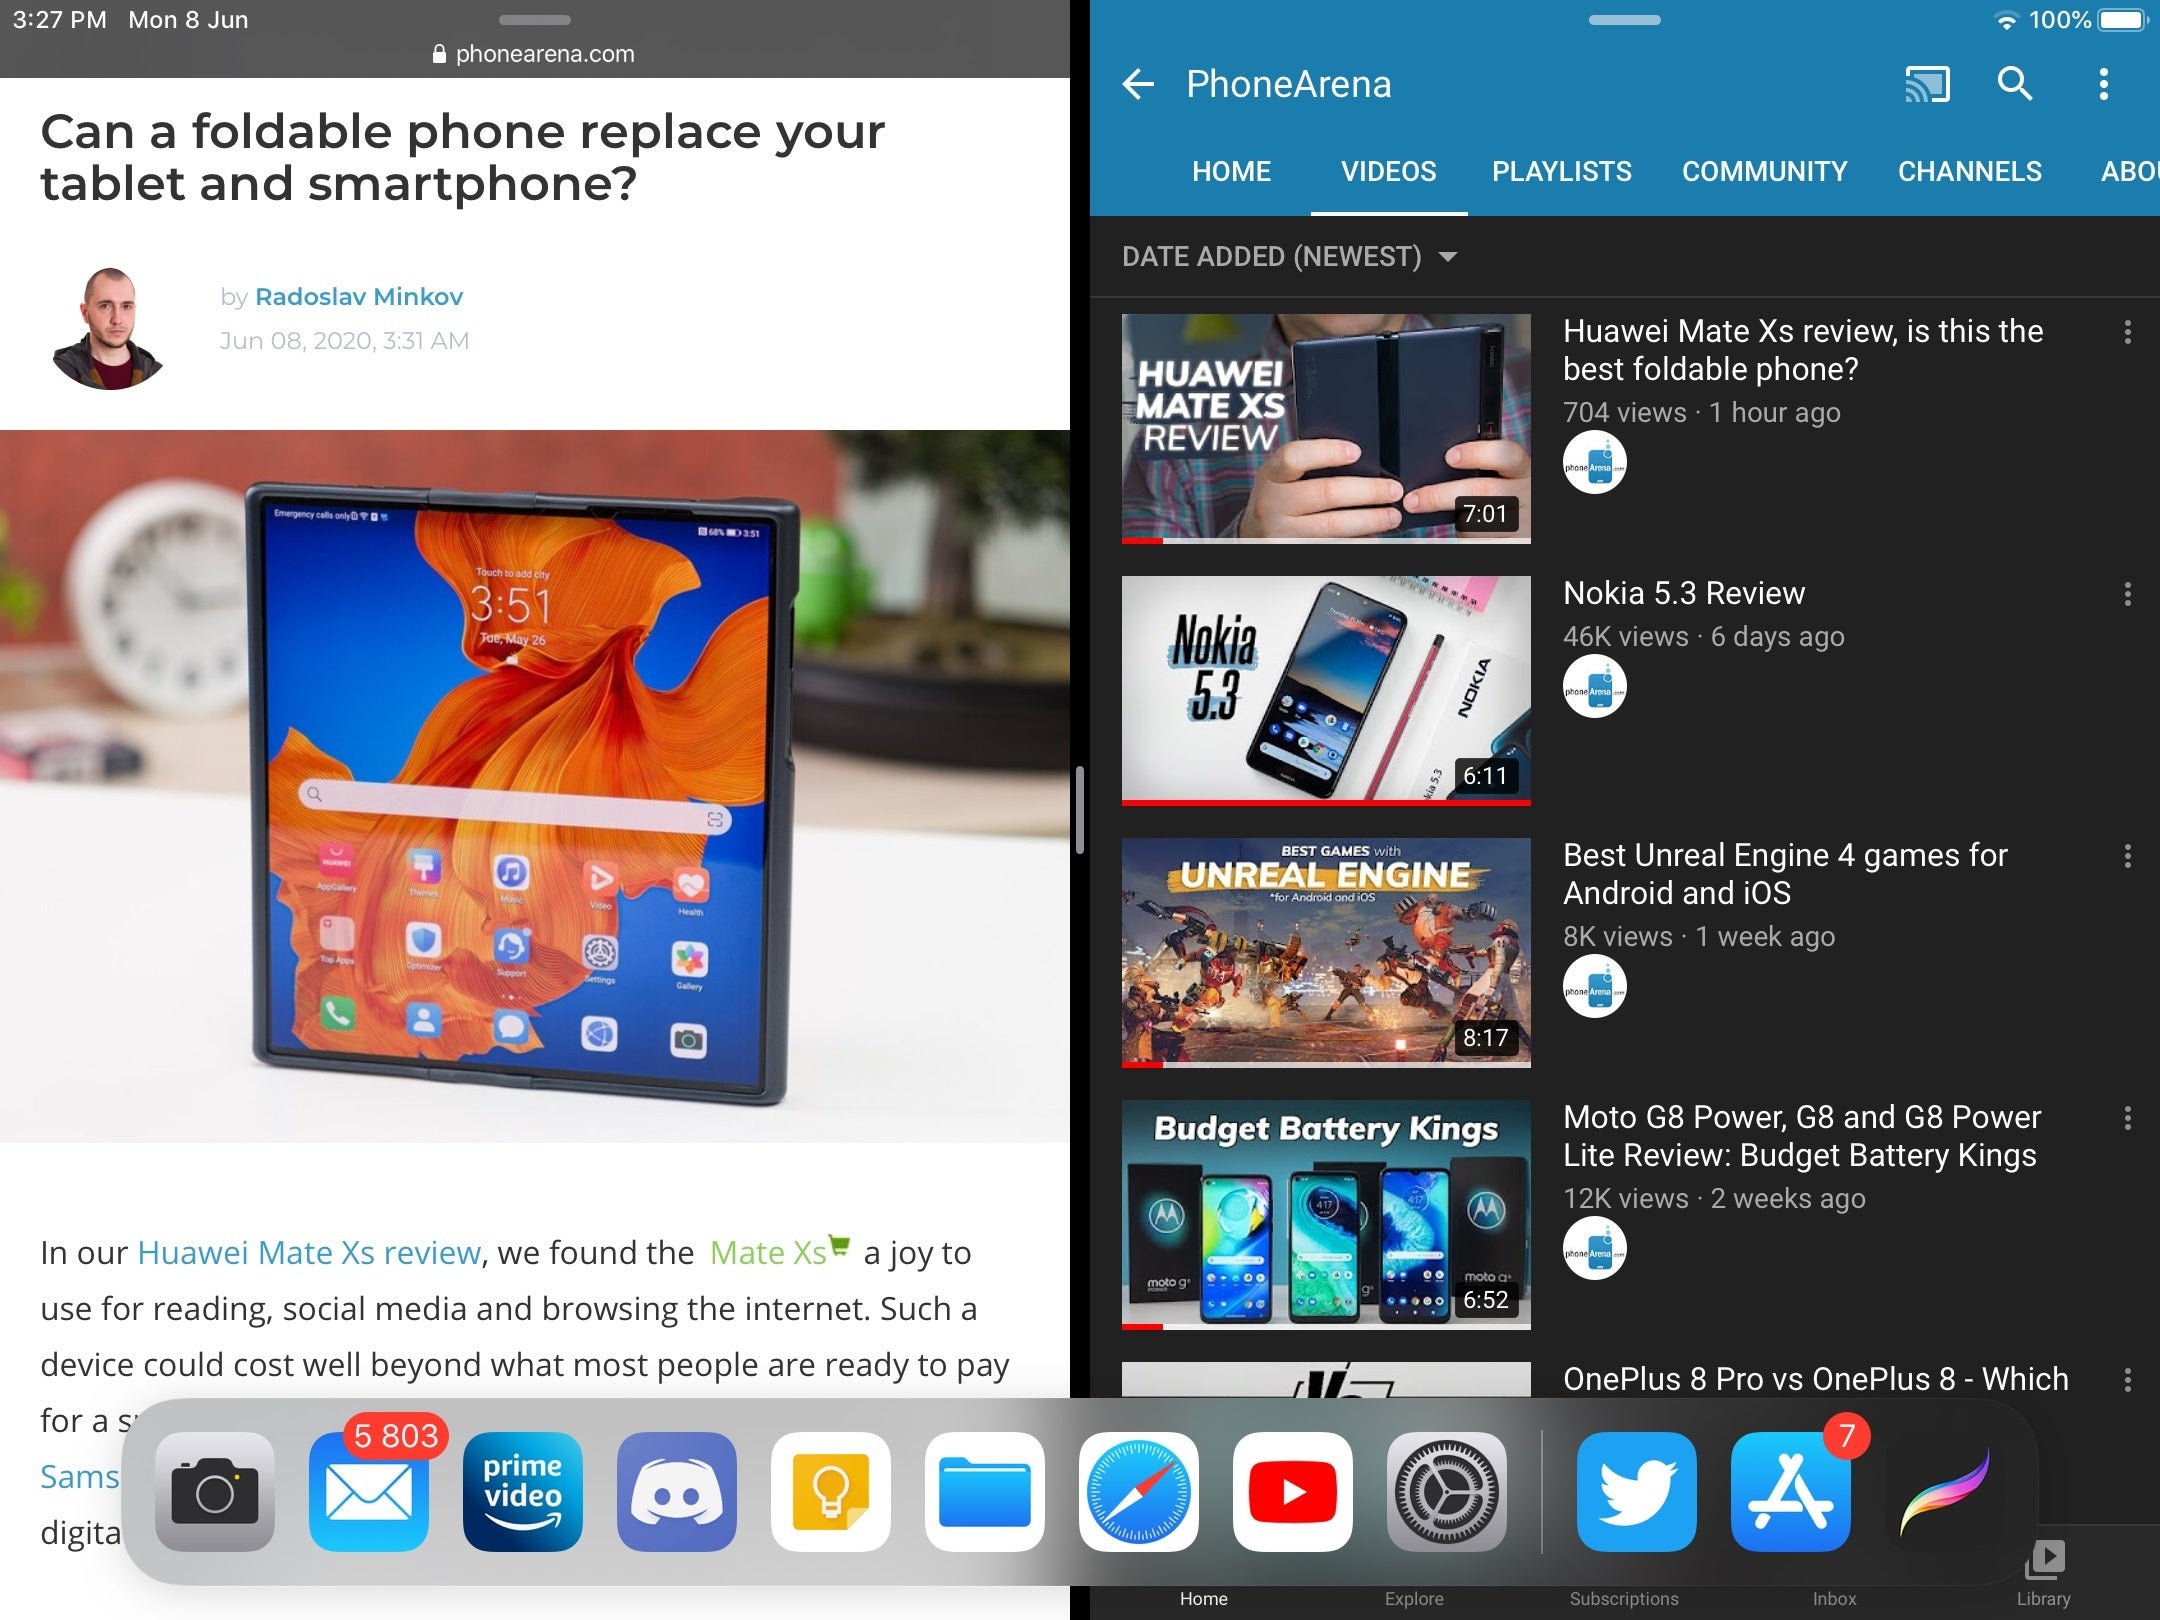 The iPadOS multitasking options and dock could make it into a Galaxy Z Fold-like foldable iPhone - Apple foldable iPhone: news, rumors, expectations